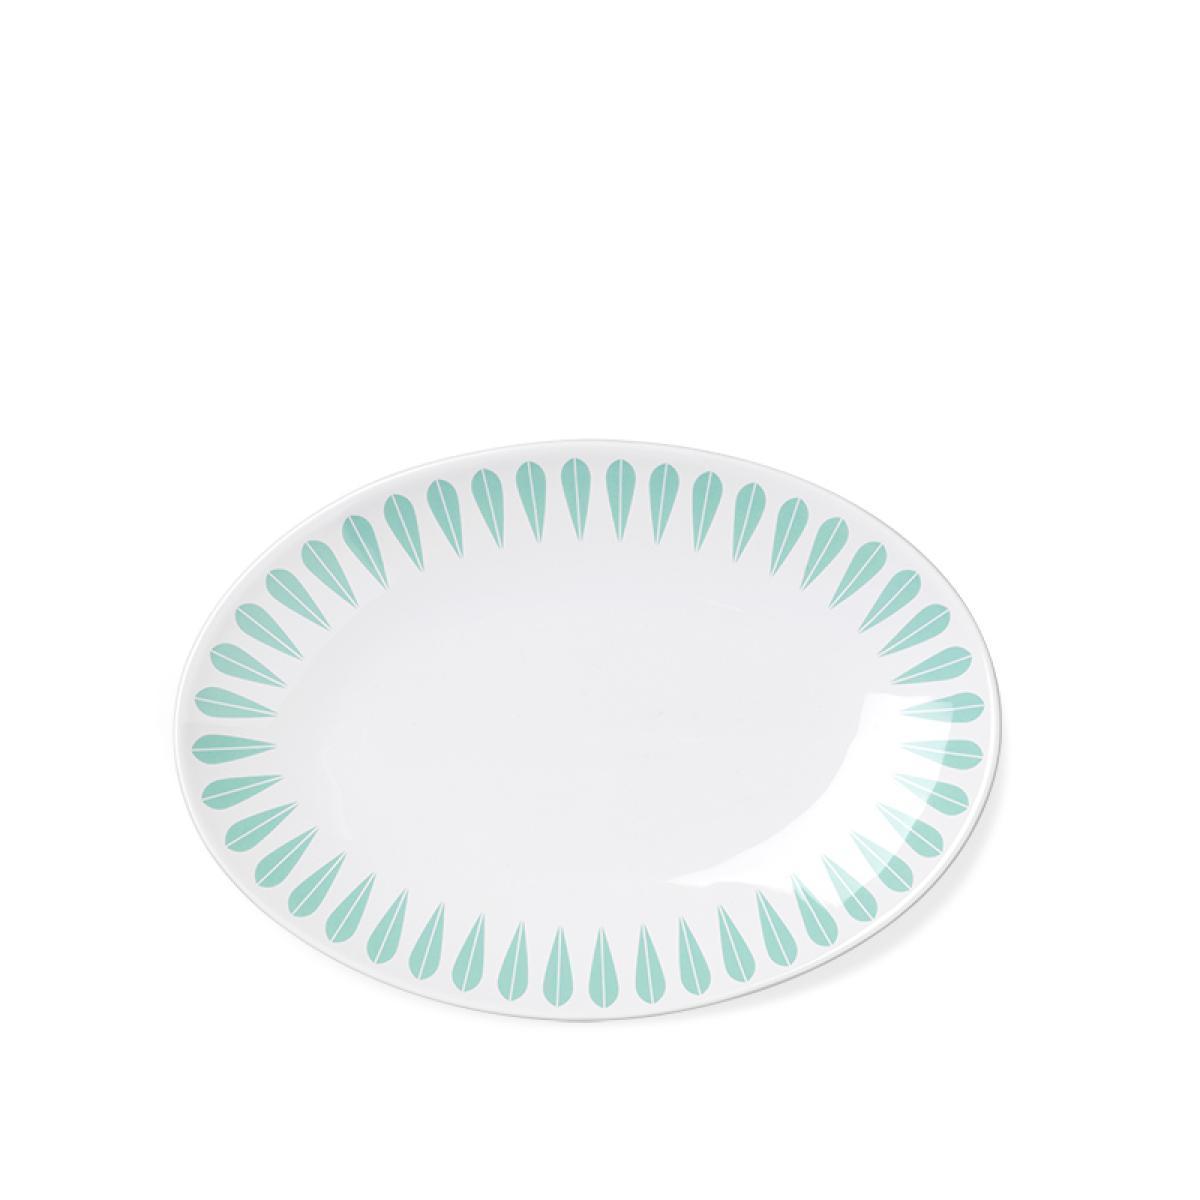 Lucie Kaas Collection Arne Clausen Service Plate Mint Green, 29 cm